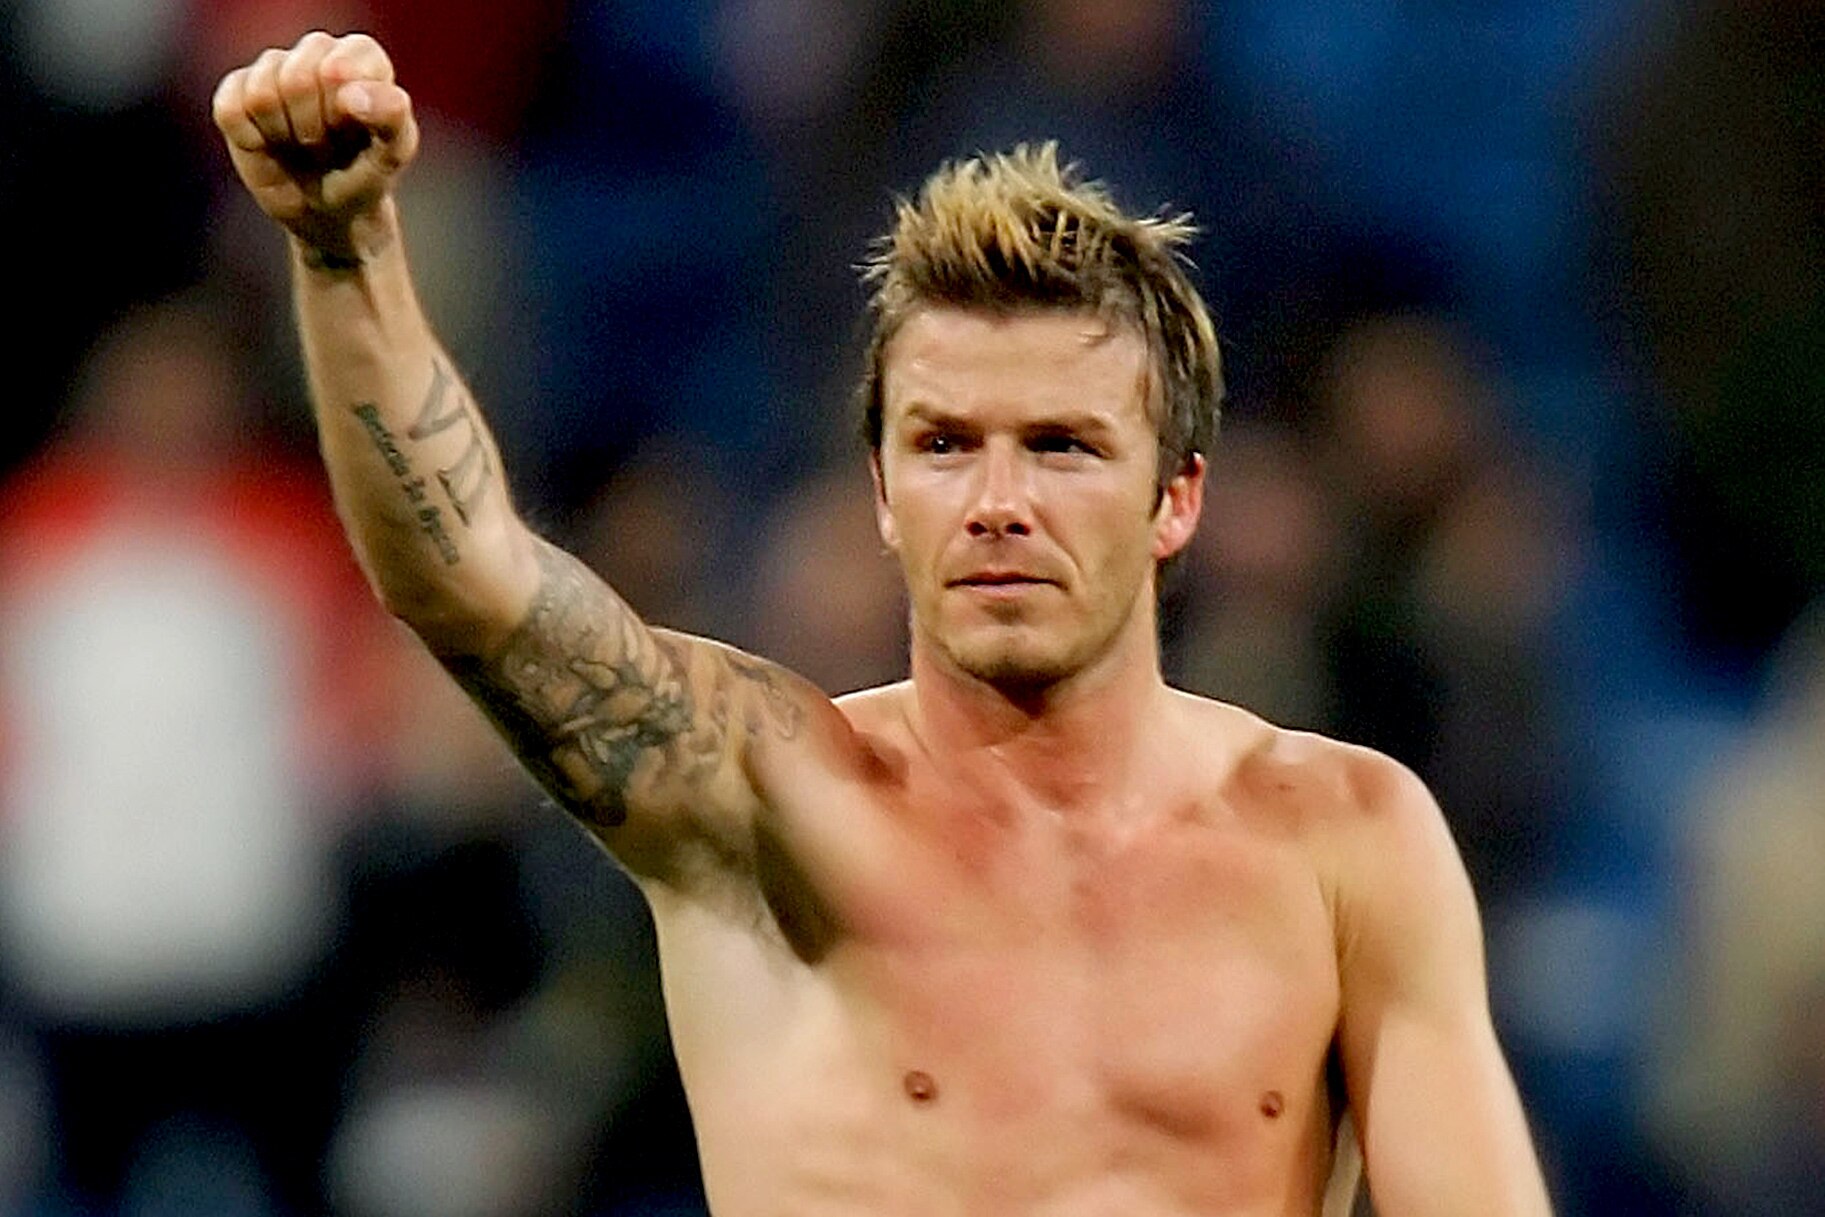 David Beckham is no stranger to taking his shirt off, but now the ...